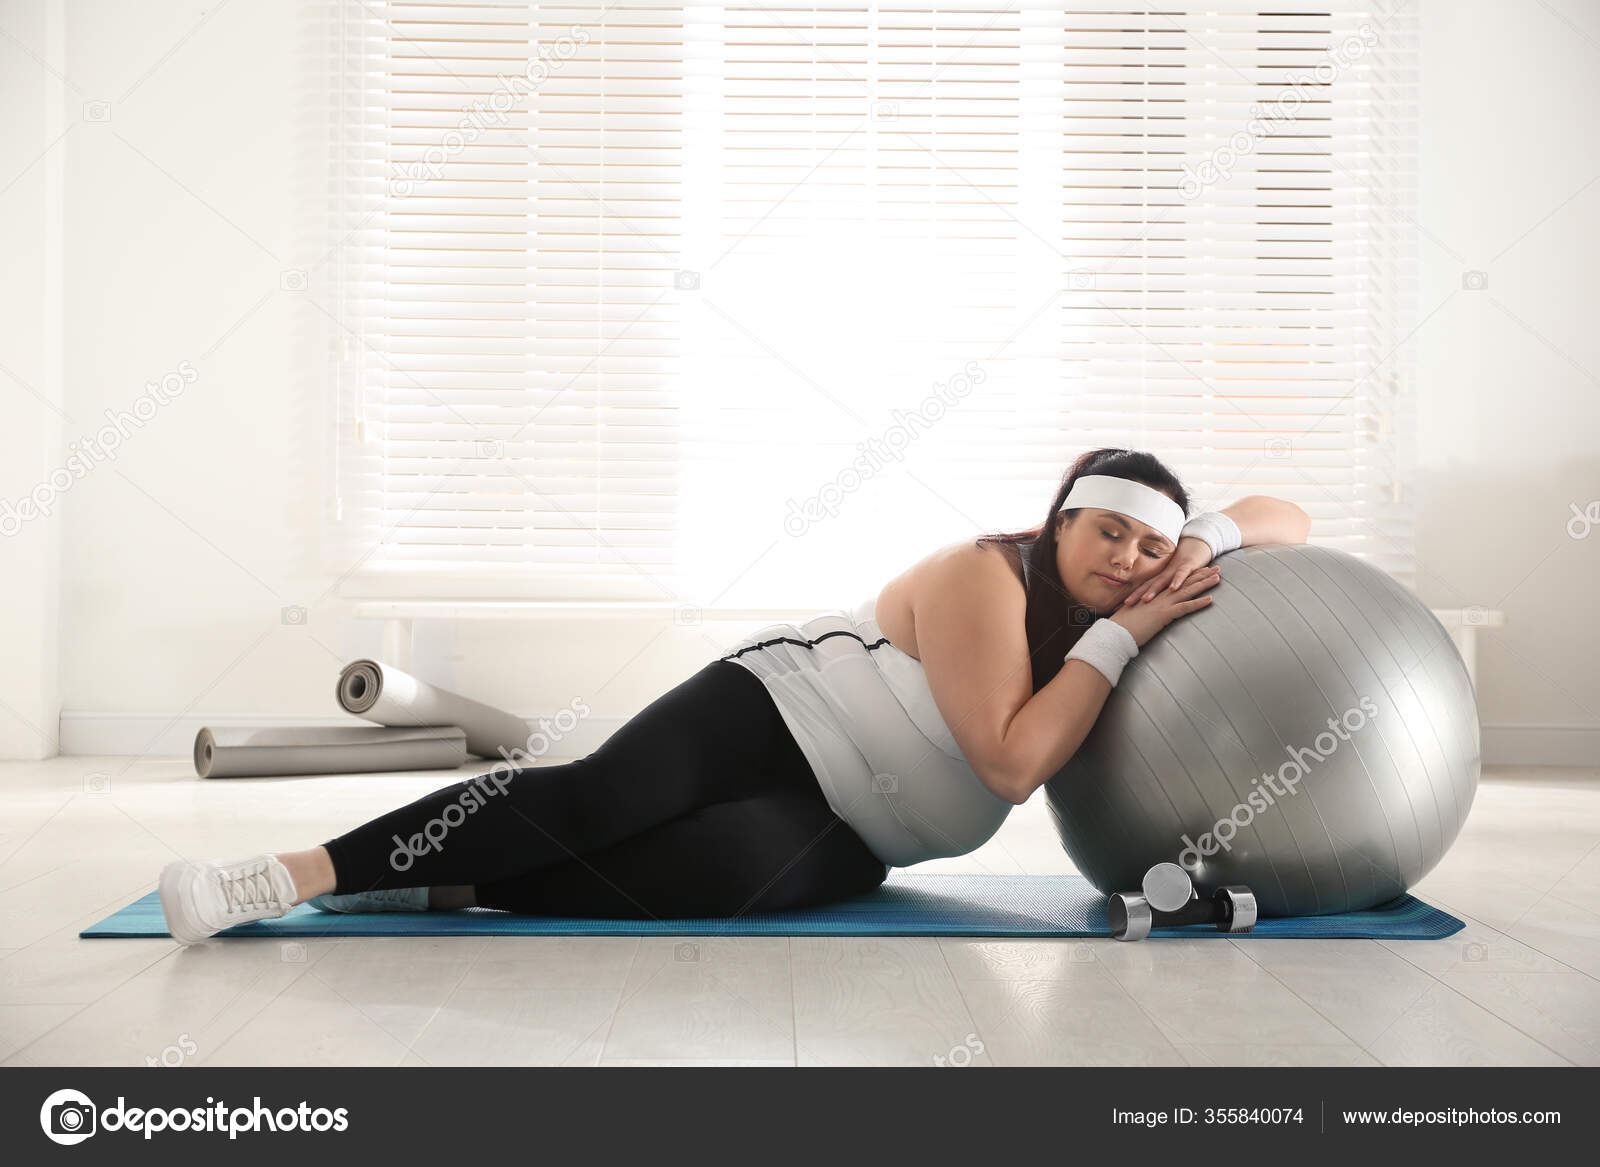 Depositphotos 355840074 stock photo lazy overweight woman leaning fit